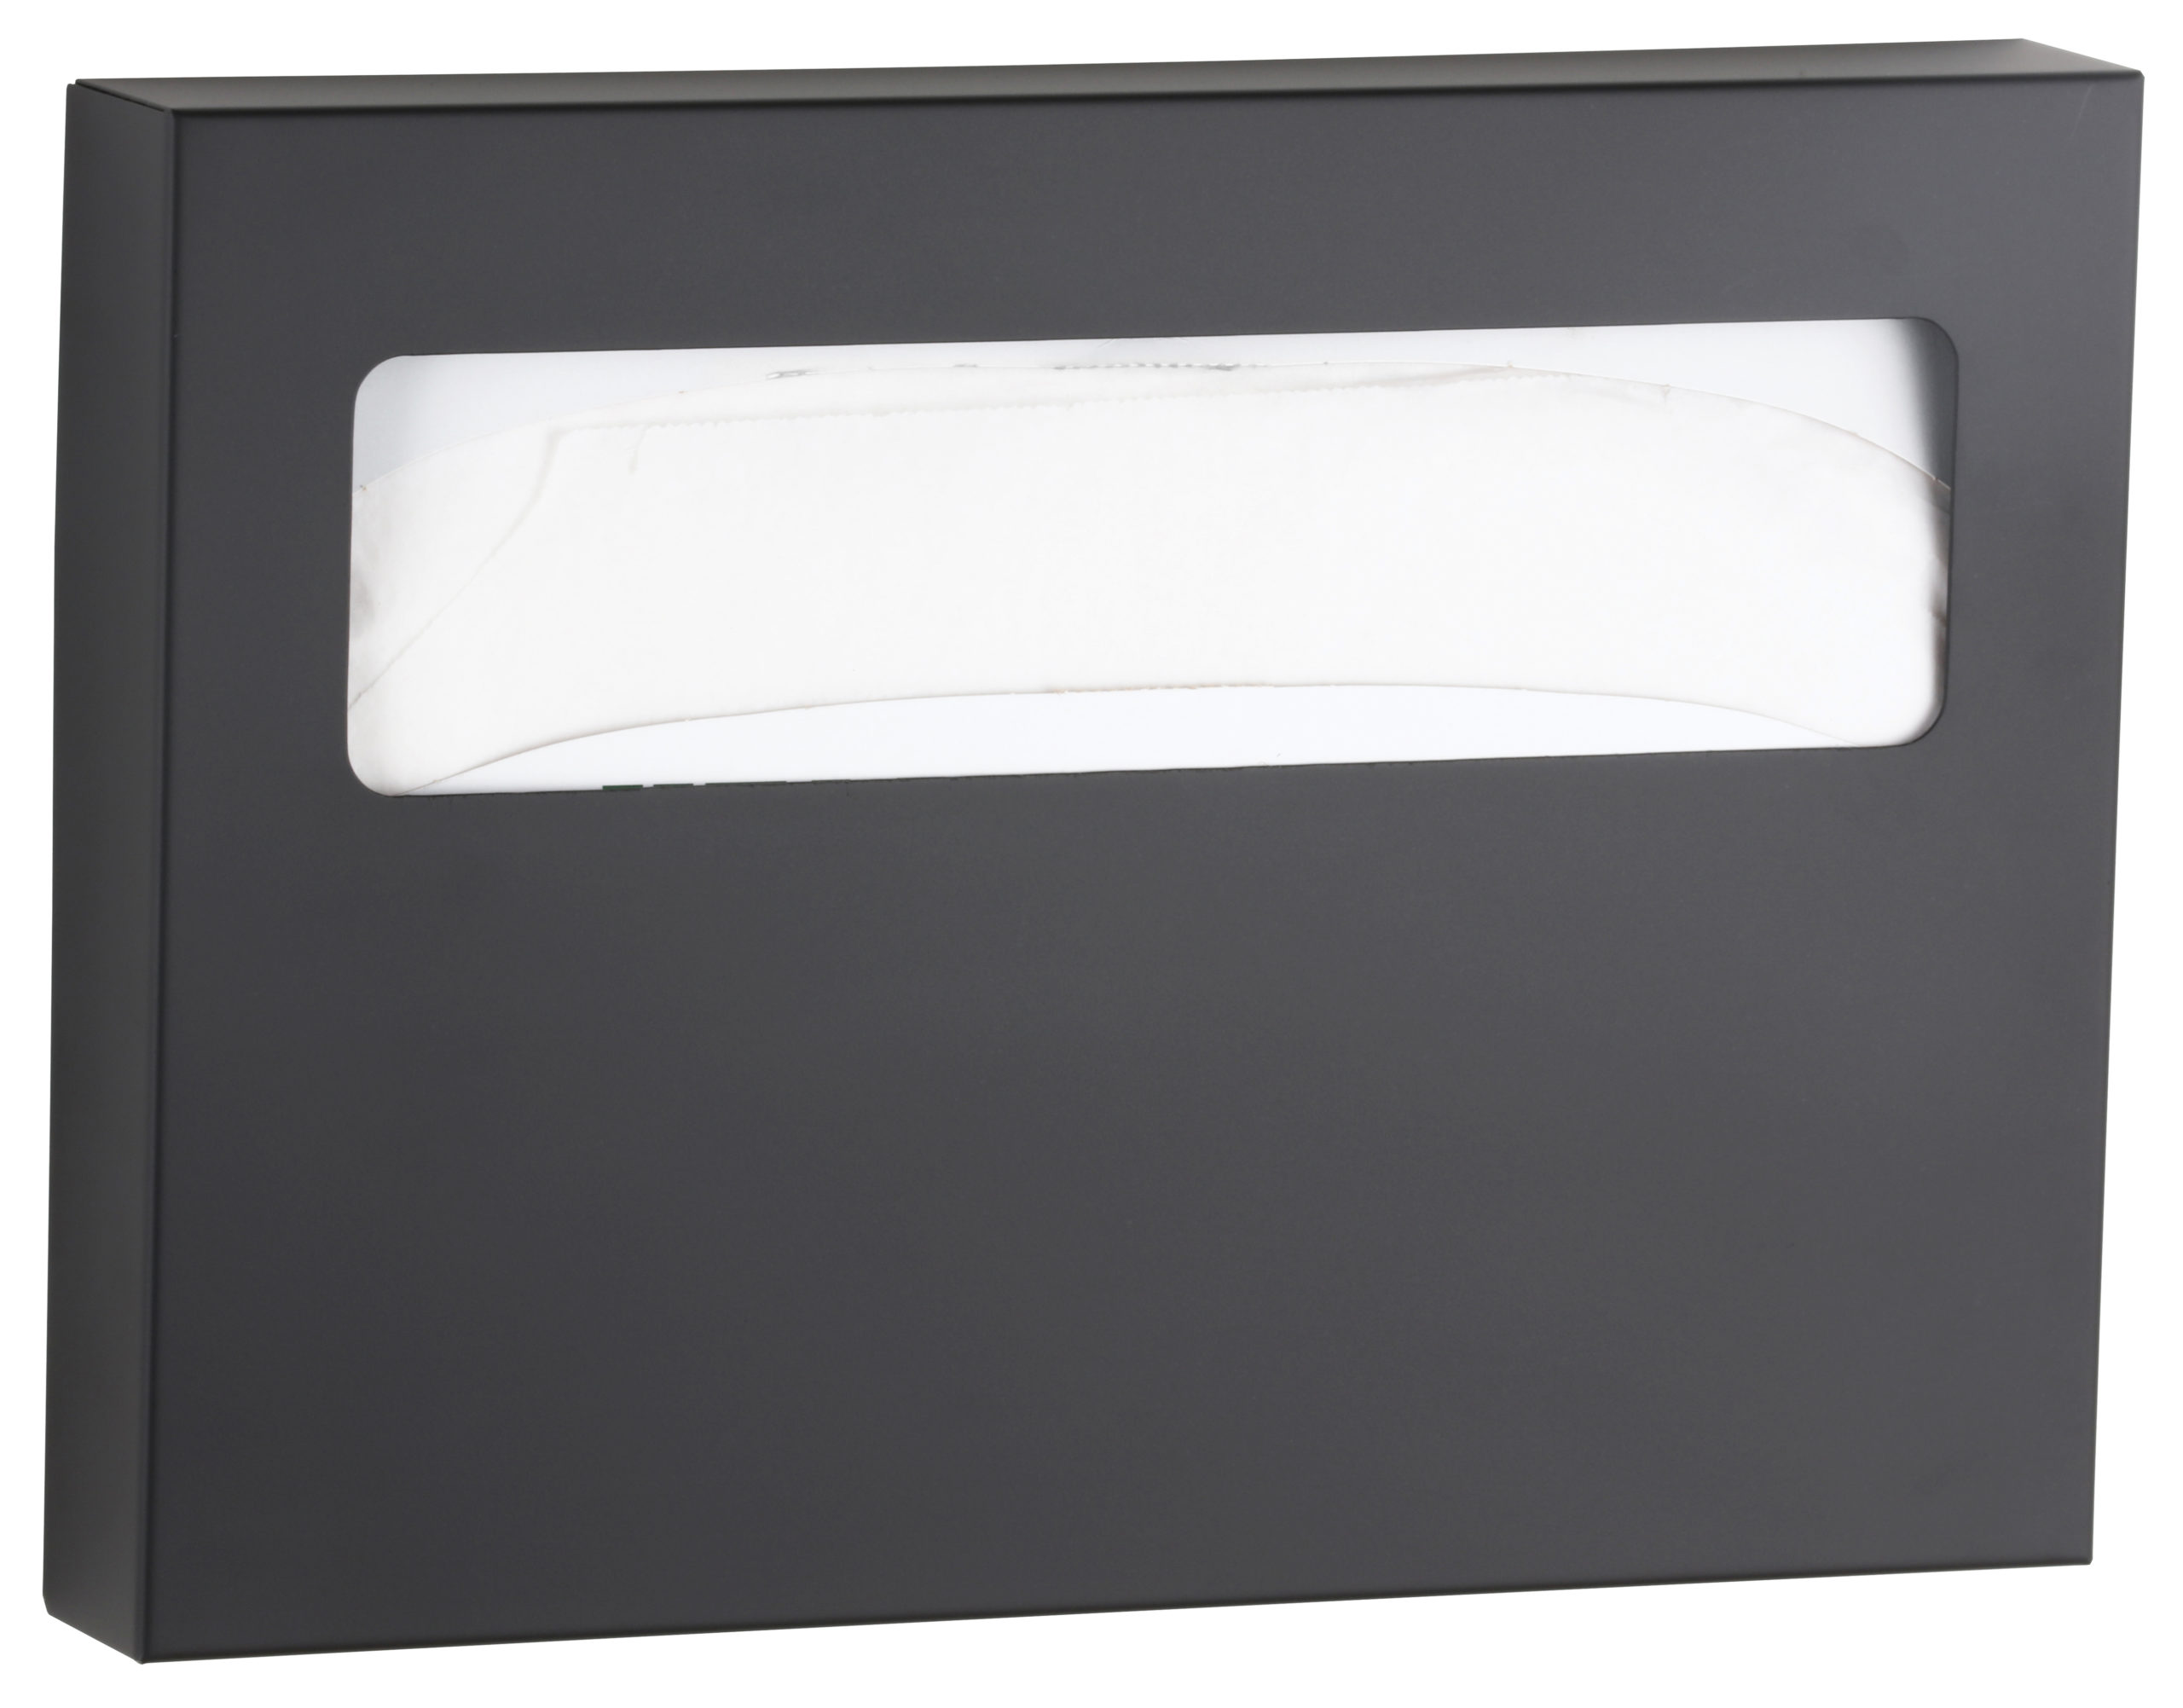 Bobrick ClassicSeries153; Surface Mounted Seat Cover Dispenser B-221 B-221 